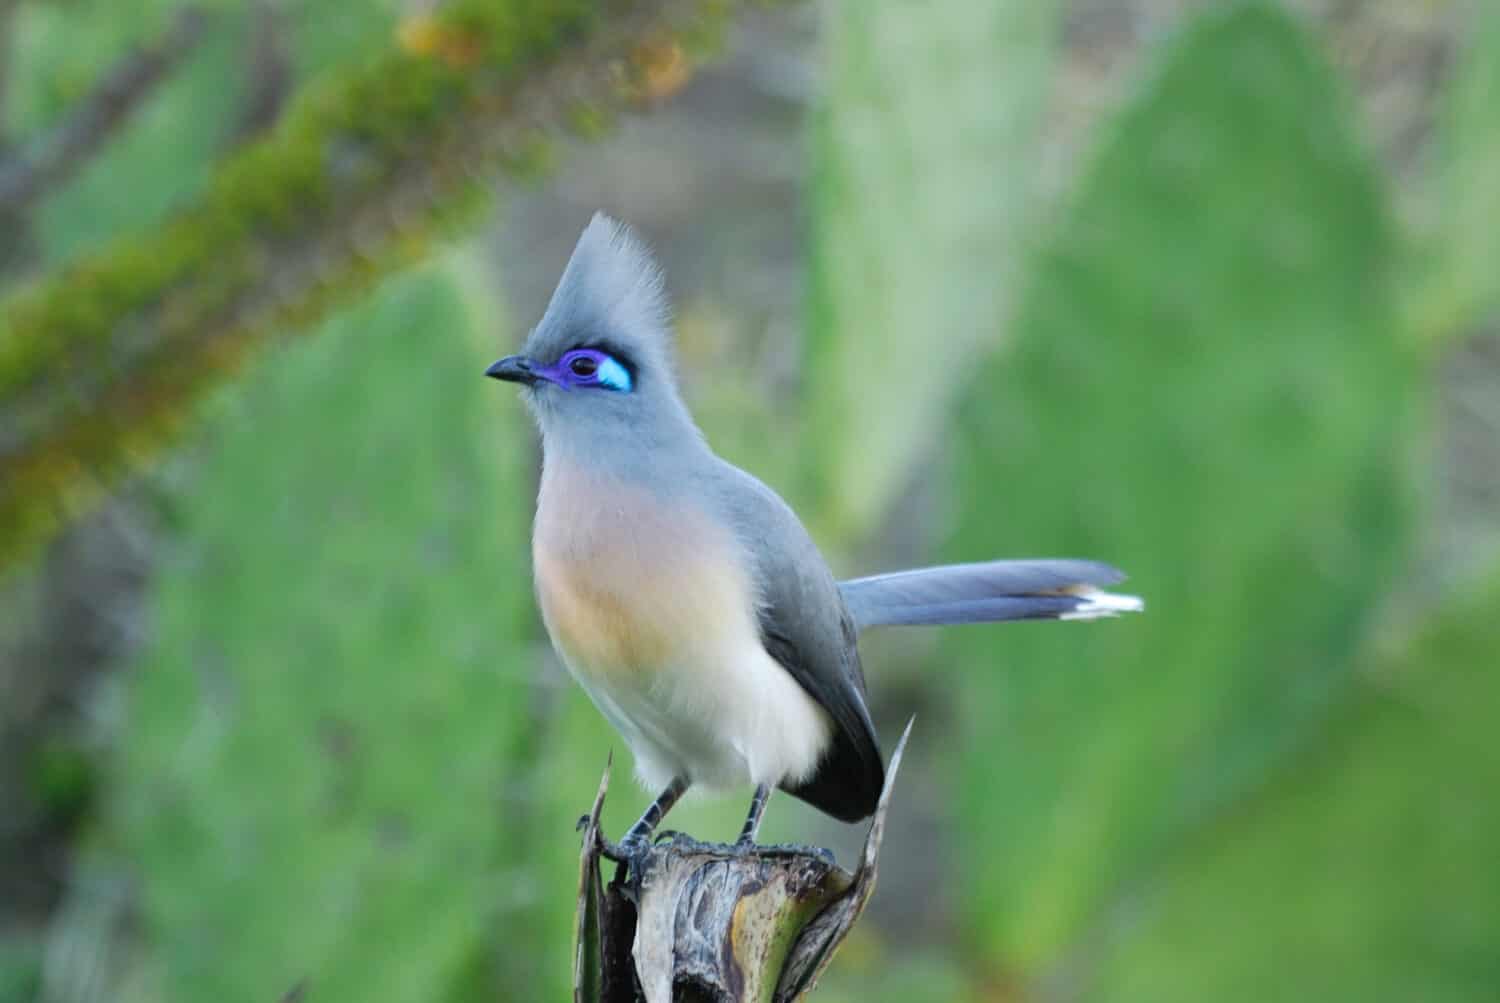 Crested Coua (Coua cristata) in the Berenty Nature Reserve, southern Madagascar